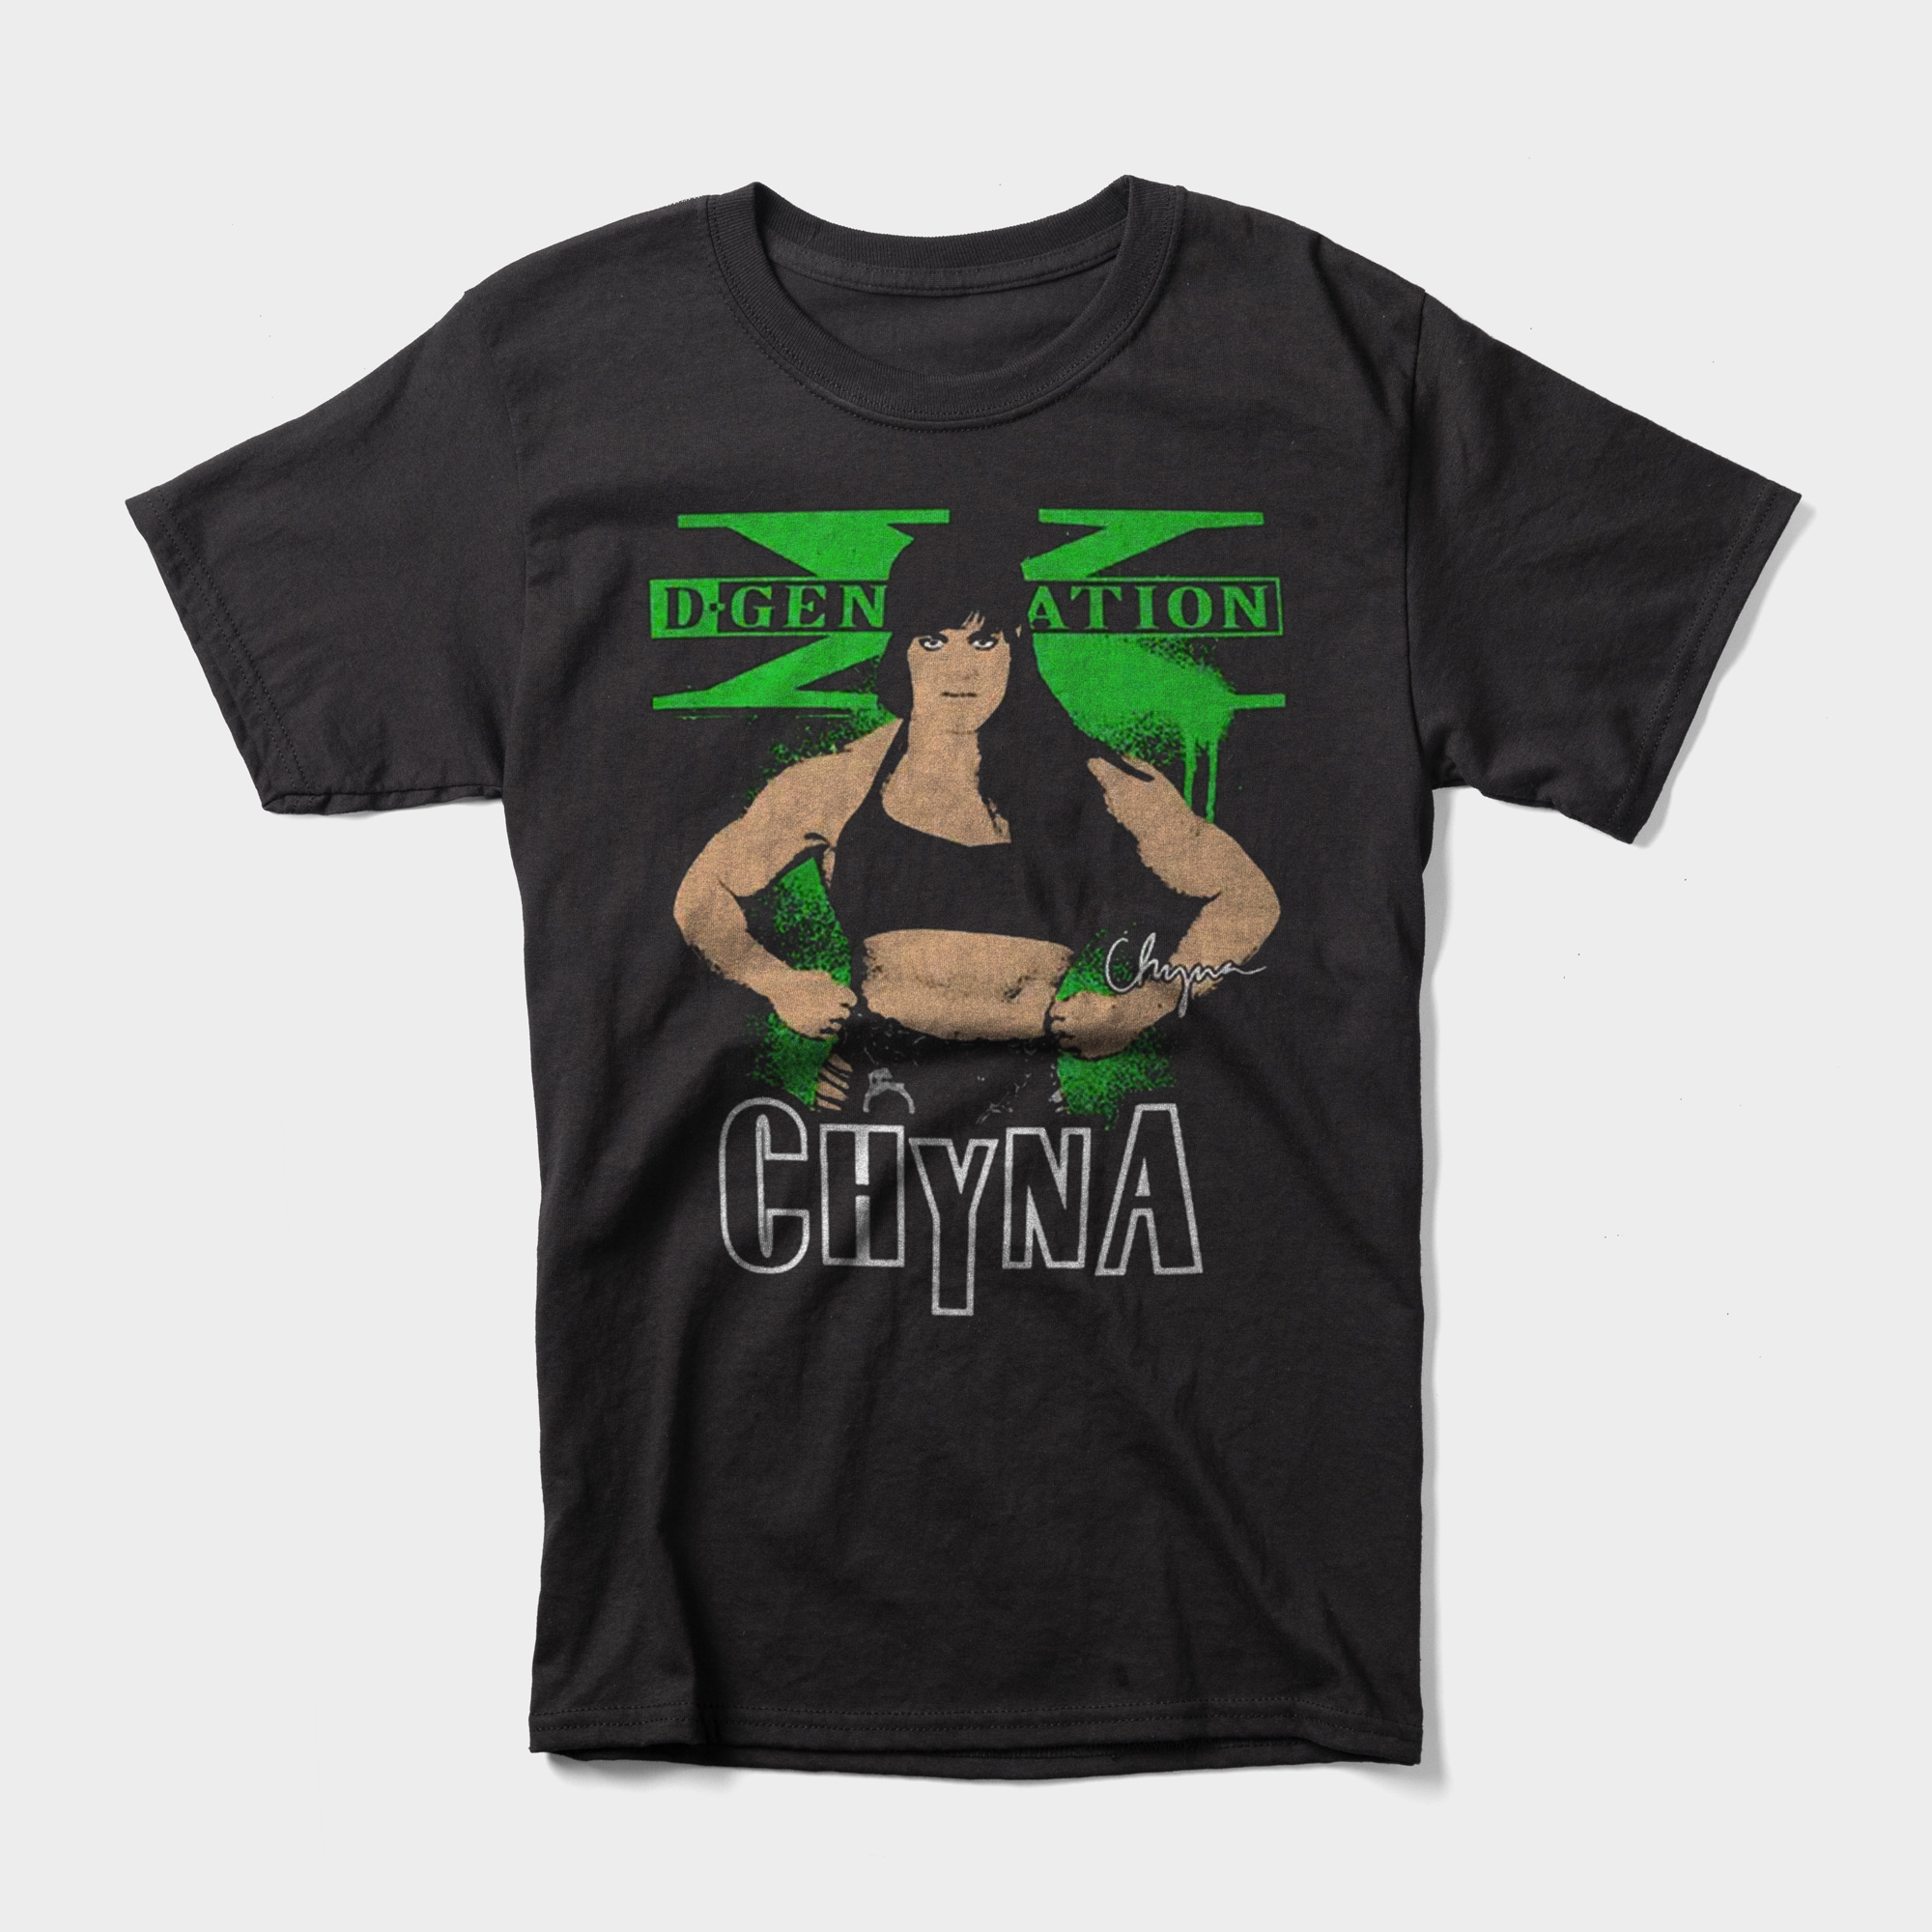 Chyna's t-shirt shows her strong figure that helped her dominate WWE, and the D-Generation X logo. 